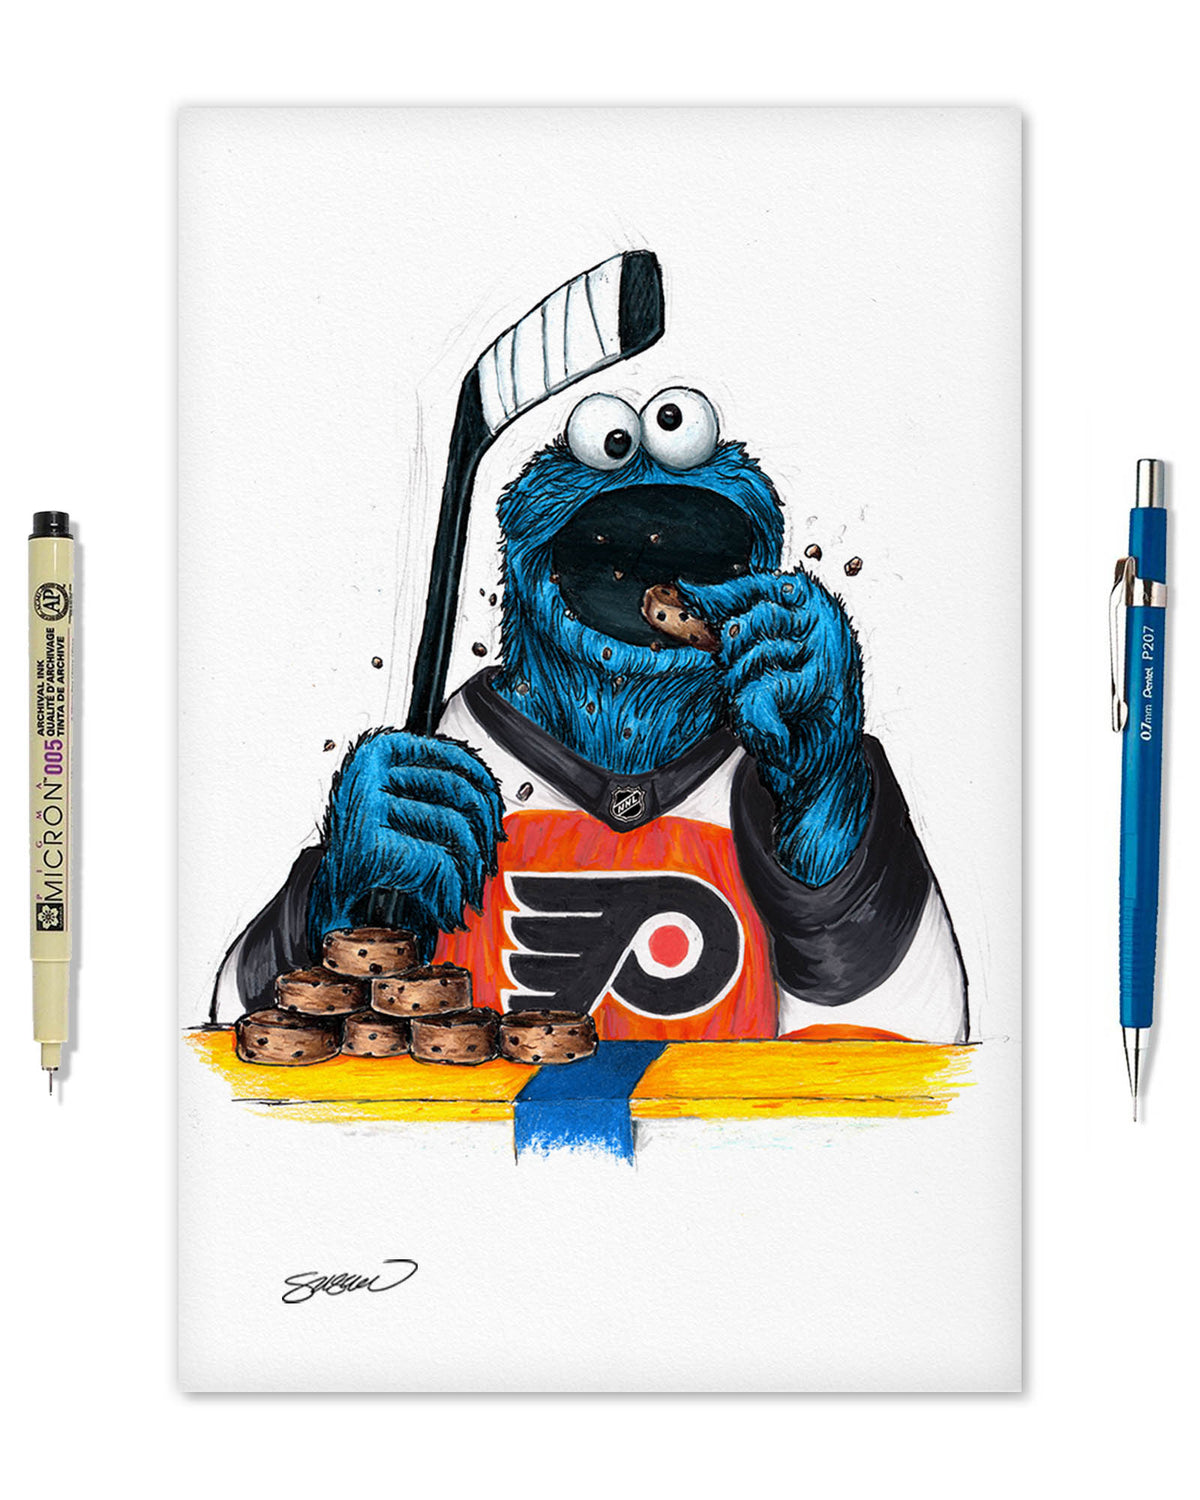 Cookie Monster x NHL Flyers Limited Edition Fine Art Print